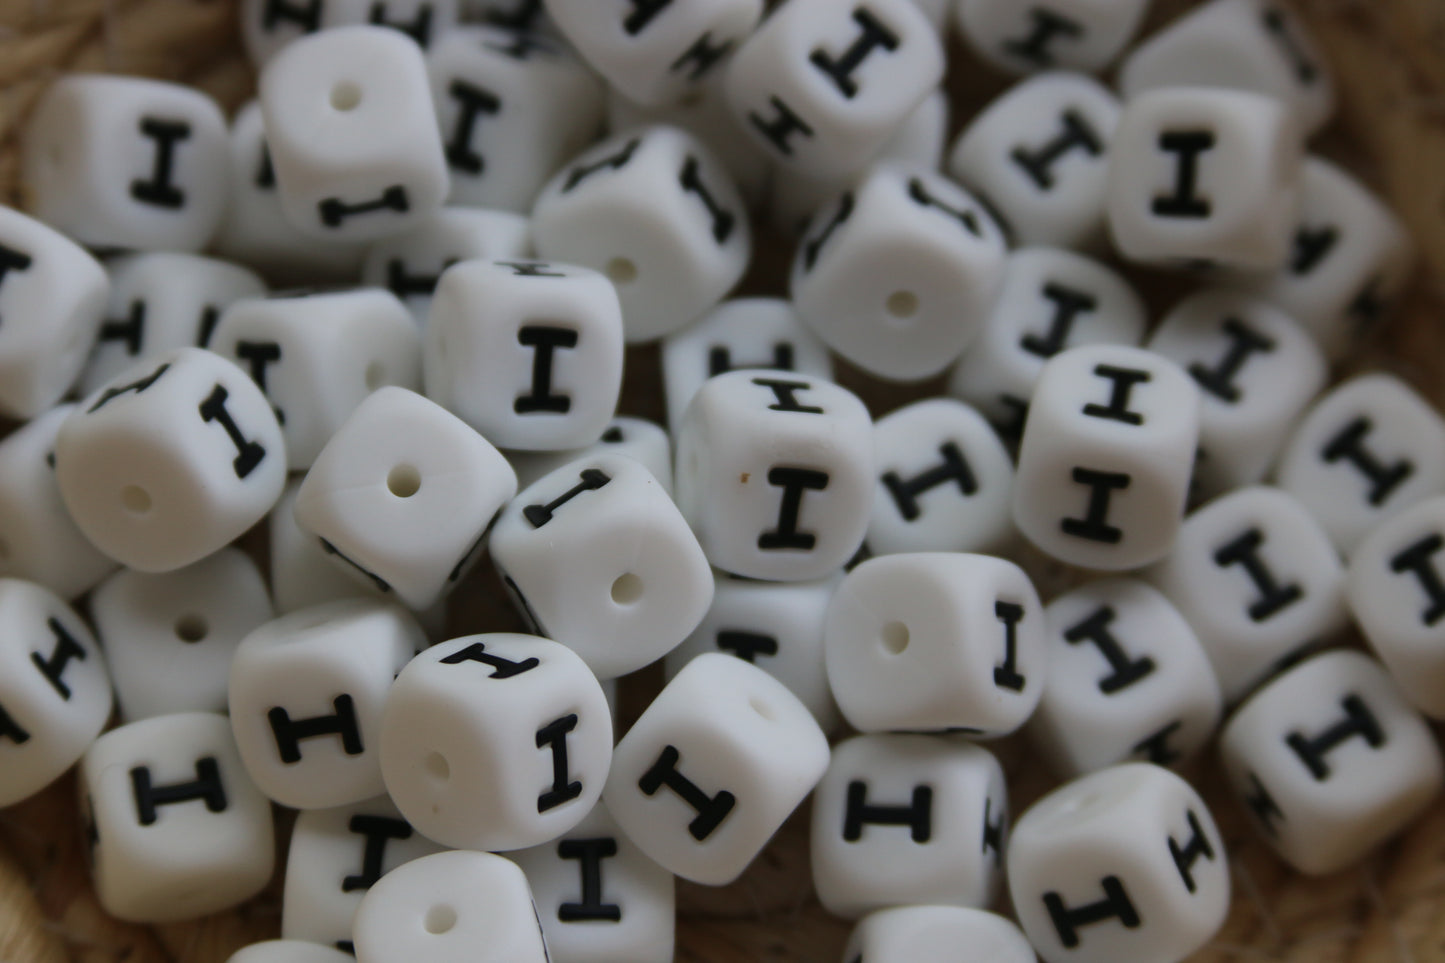 12mm Silicone Letters (5 pk)